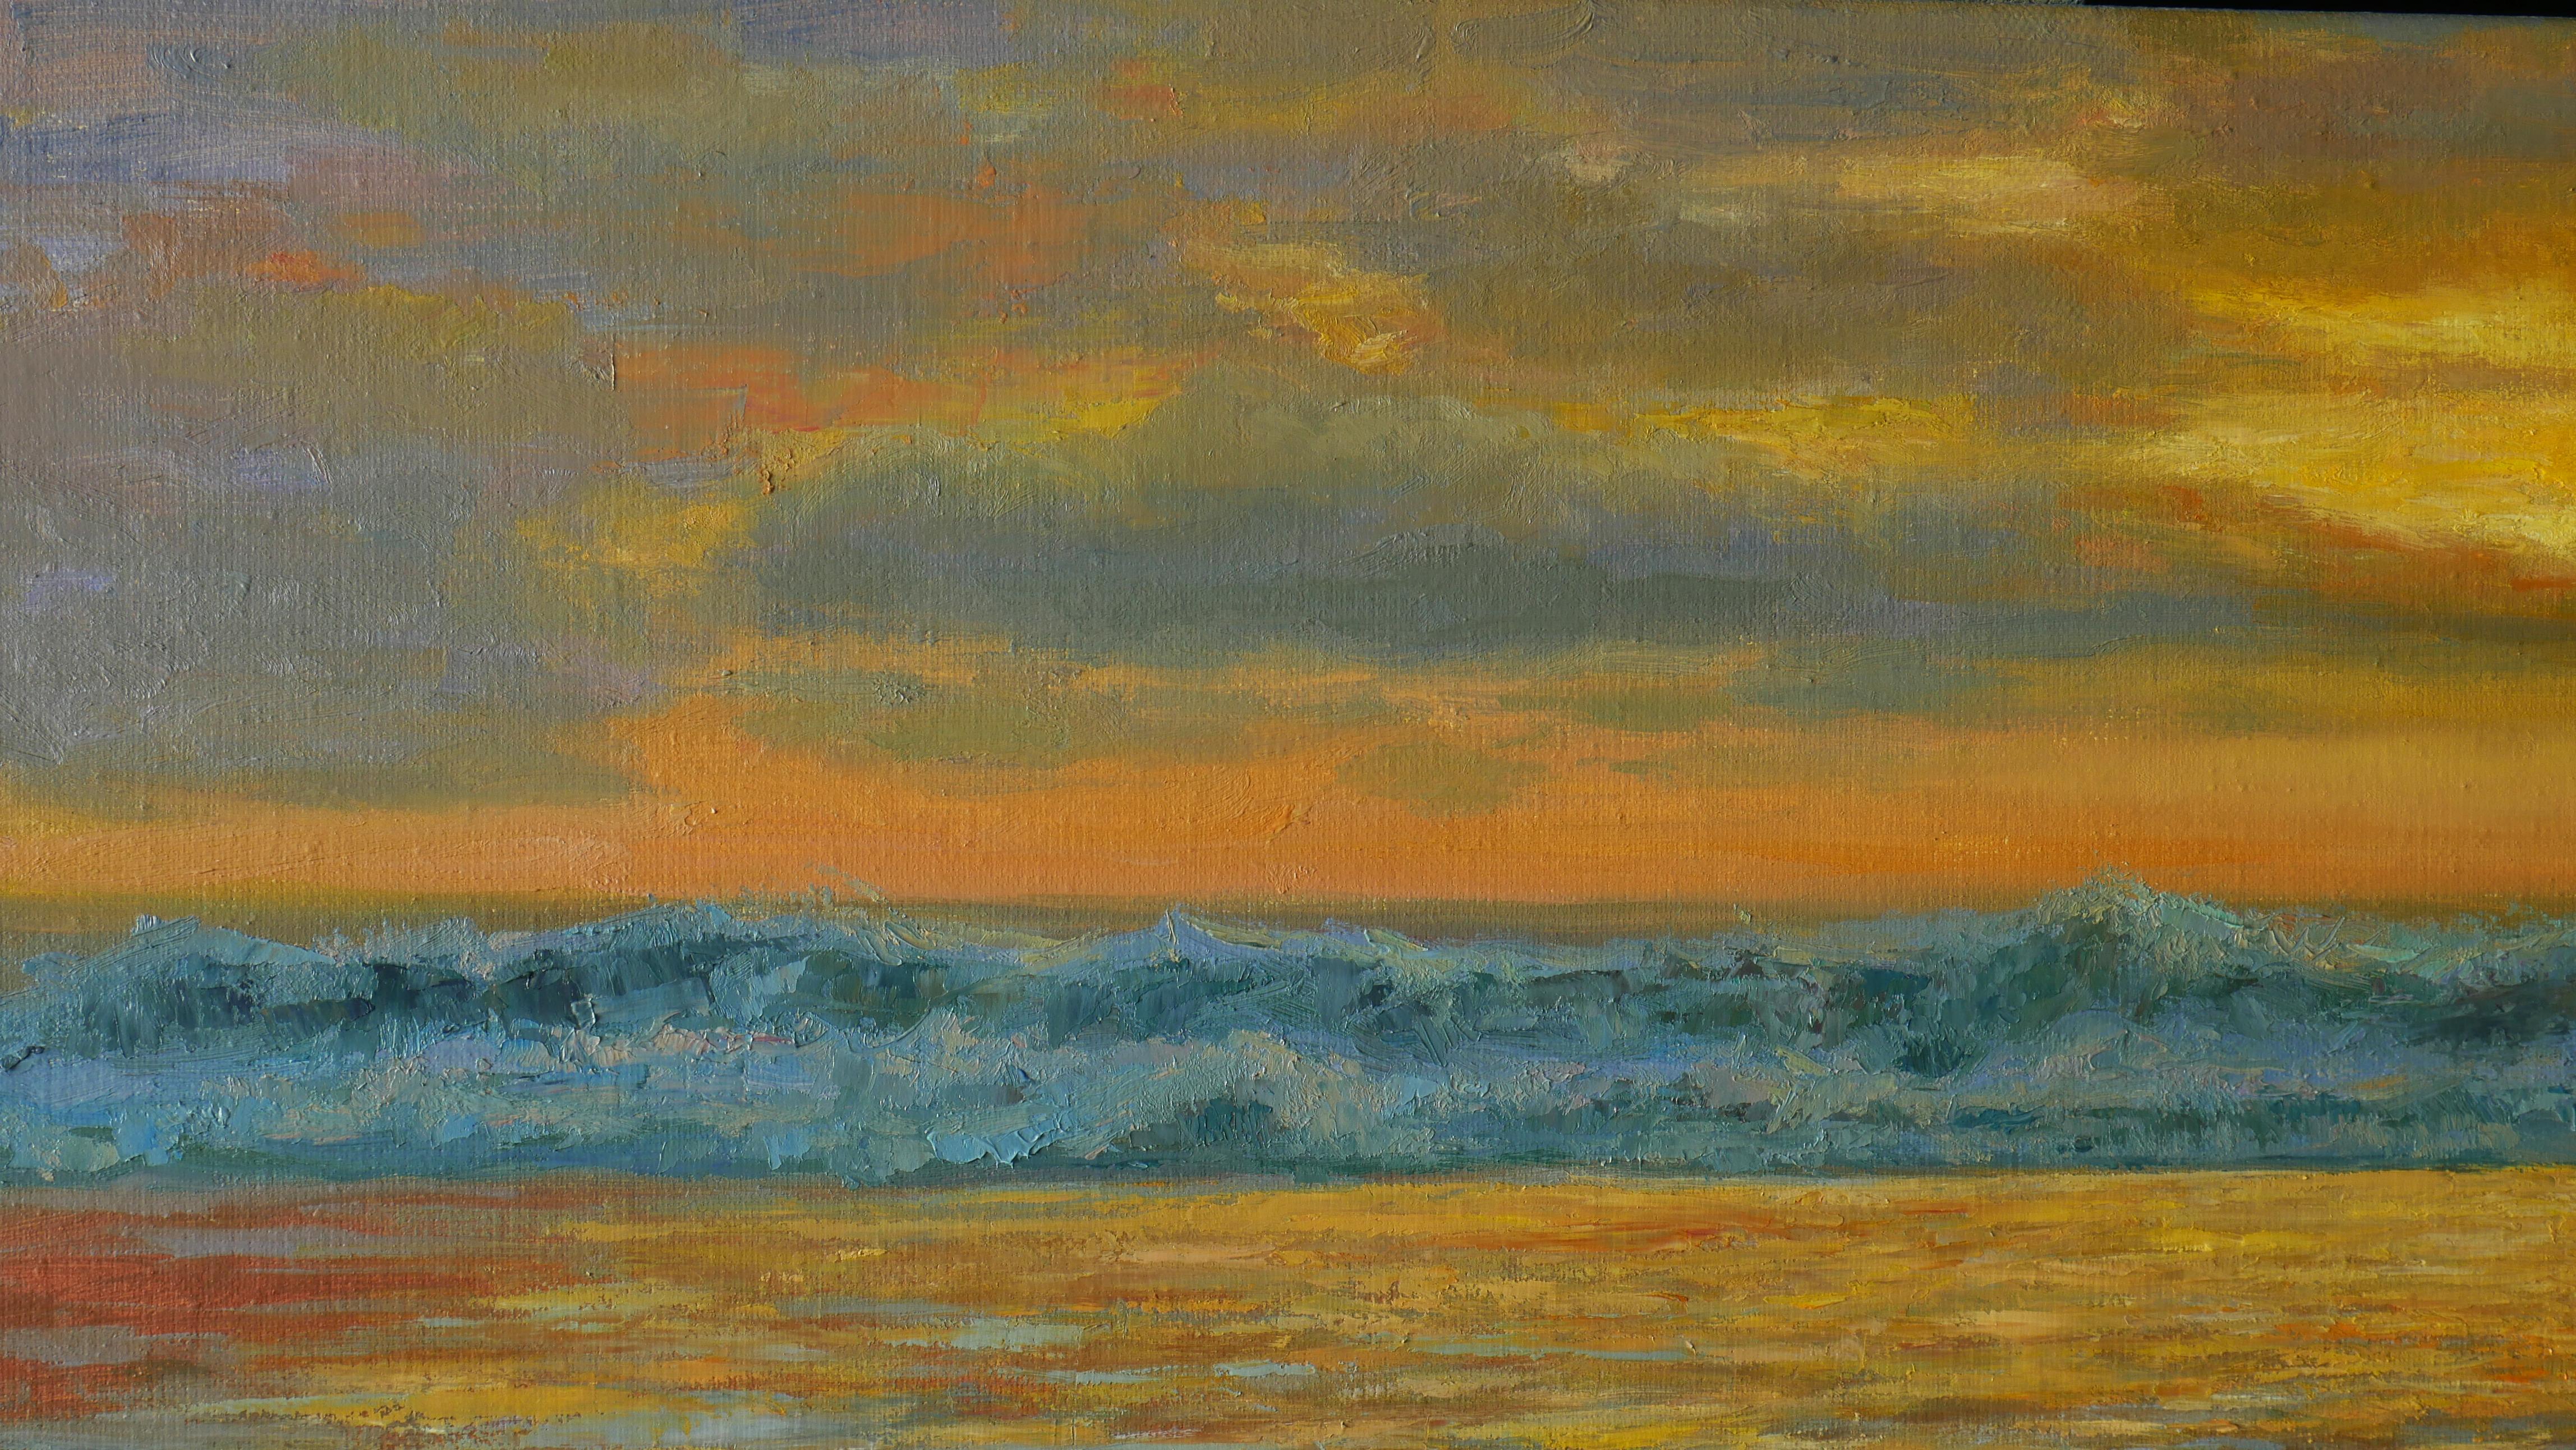 The sea is especially beautiful when the sunny warm evening light illuminates the waves, which begin to shine. The sunny evening seascape is unique, because the artist used his unique technique to capture the glow of sunlight. The artwork will